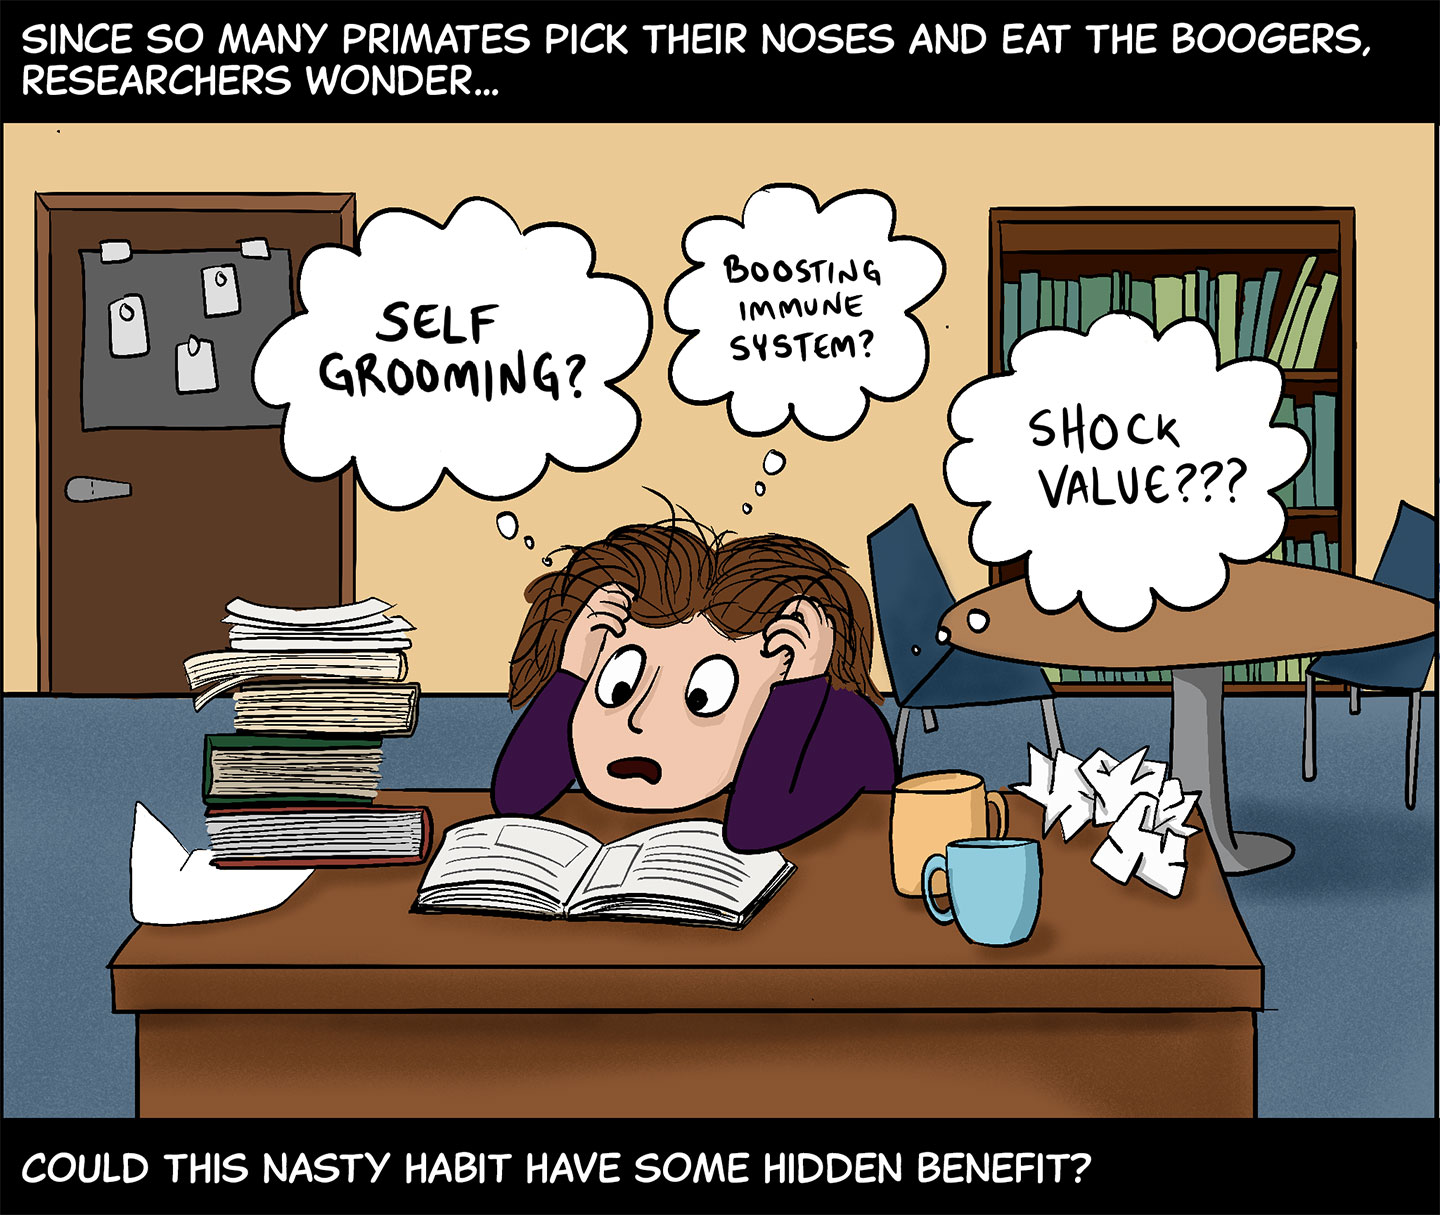 Panel 7. Text (above image): Since so many primates pick their noses and eat the boogers, researchers wonder… Image: Fabre sits slumped over her desk, clutching her head, as she looks through a book. A stack of books, several crumpled papers and two coffee mugs also sit on the desk, which is inside an office. Fabre thinks, “Self-grooming? Boosting immune system? Shock value???” Text (below image): …could this nasty habit have some hidden benefit? 